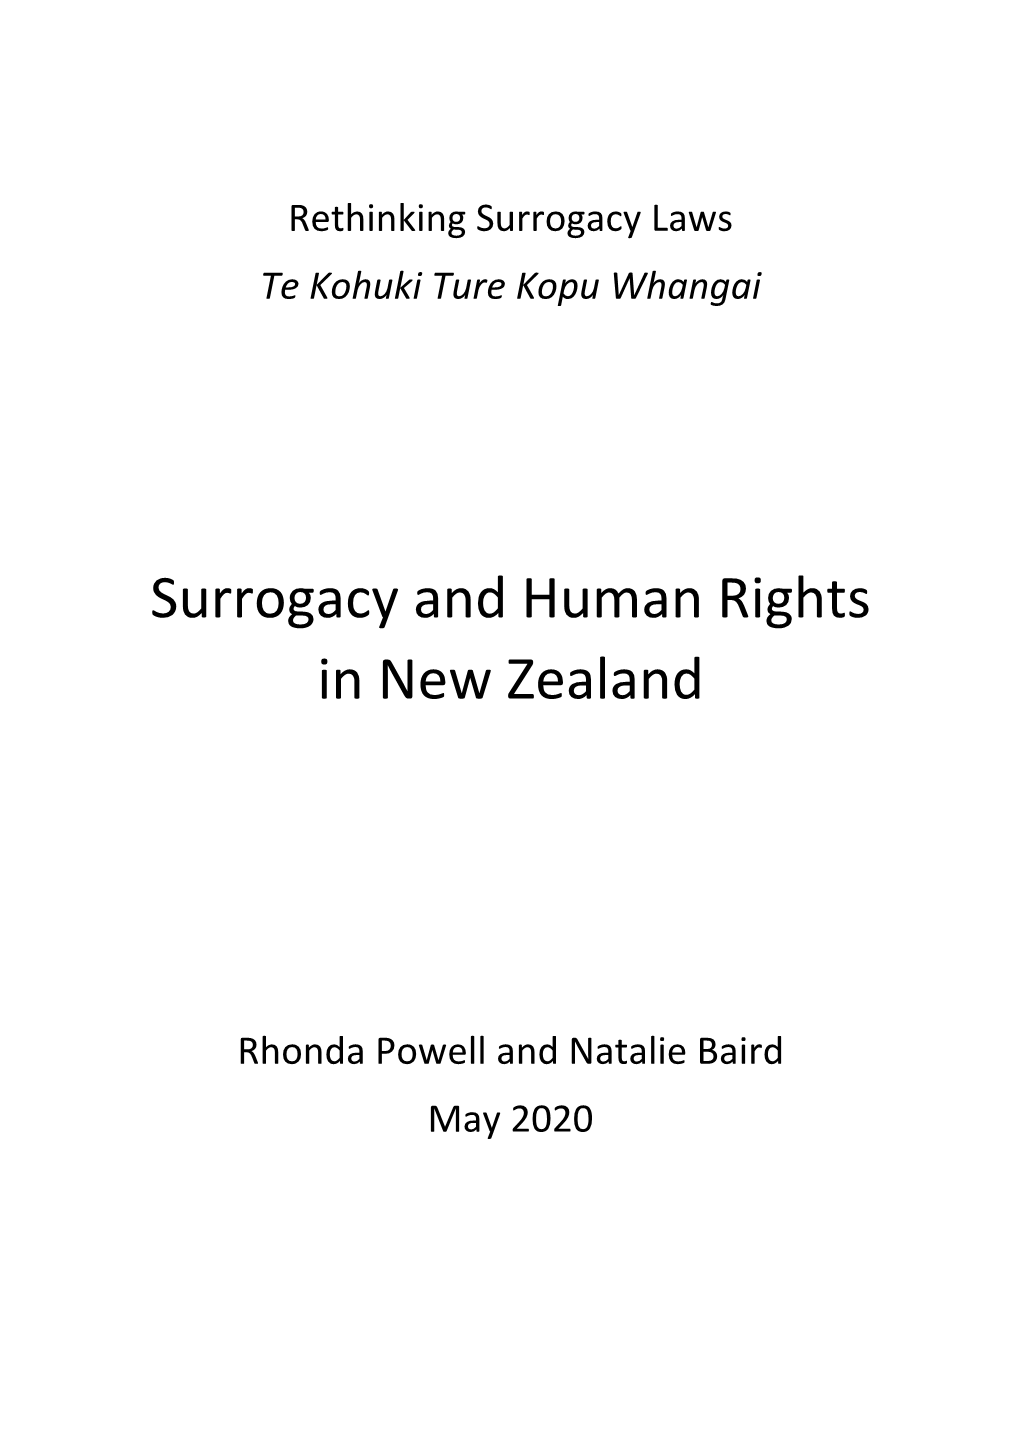 Surrogacy and Human Rights in New Zealand